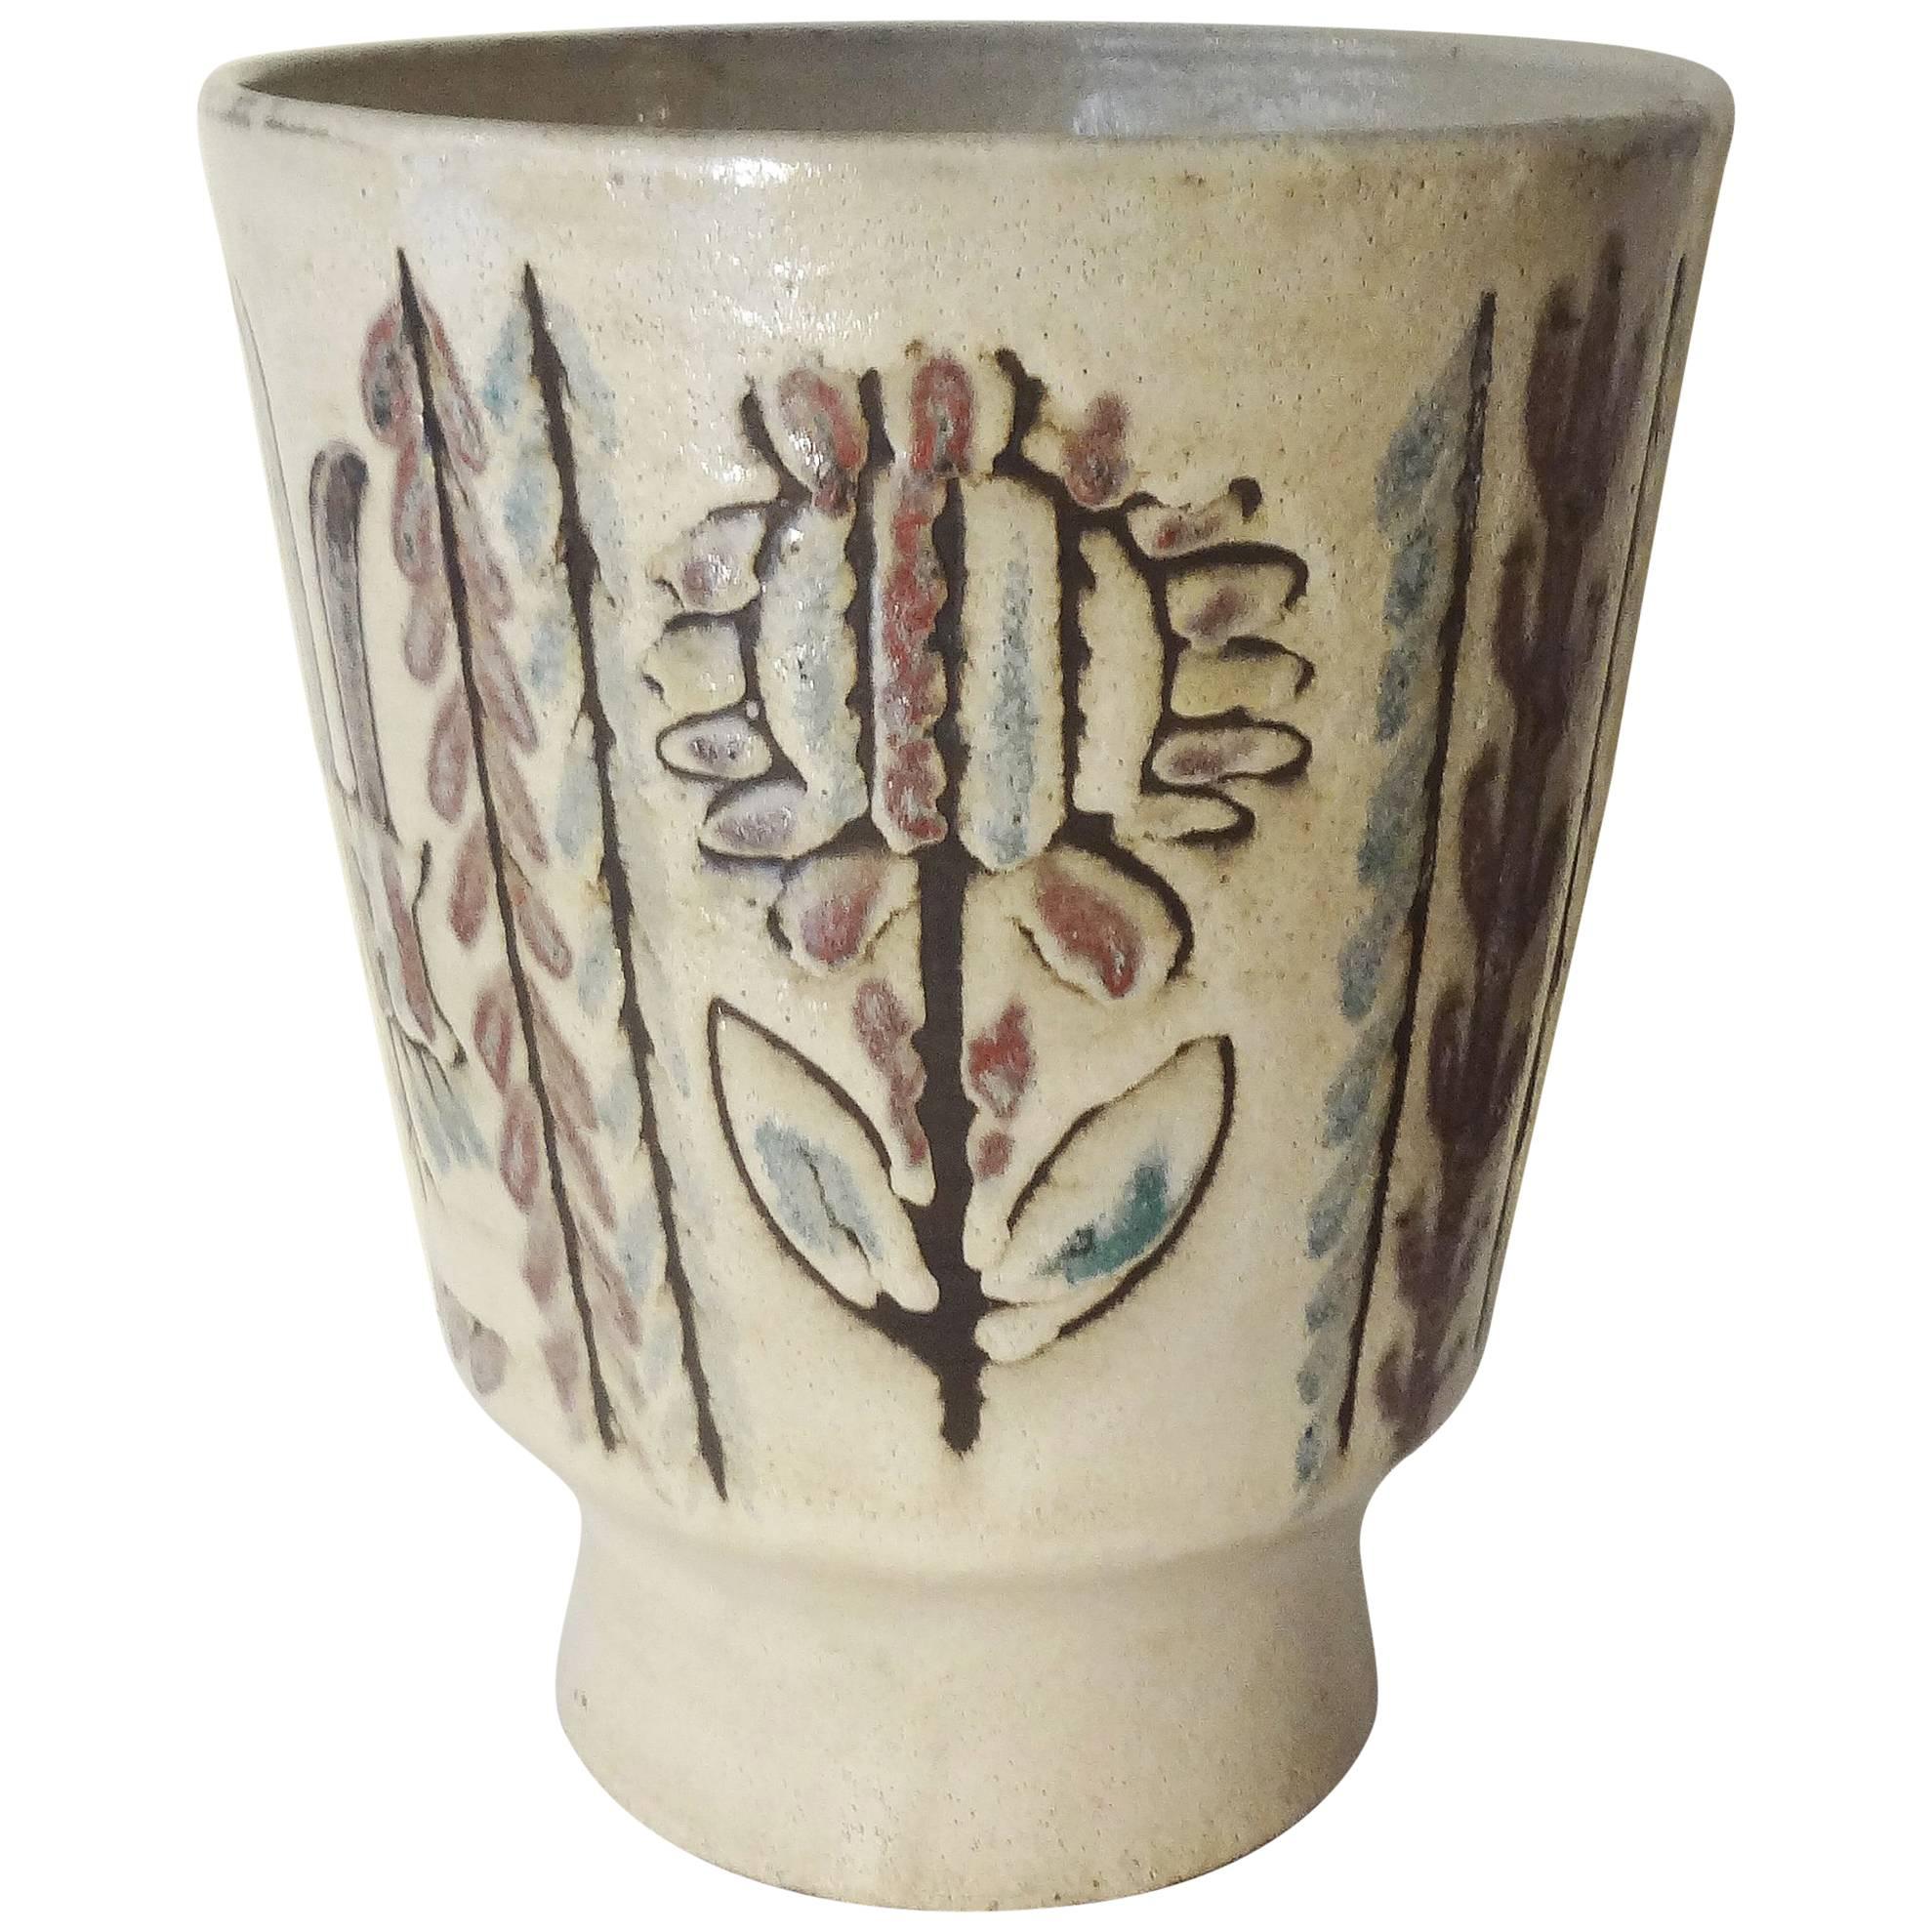 Important Earthenware Vase by G.Reynaud, Vallauris, France, circa 1955